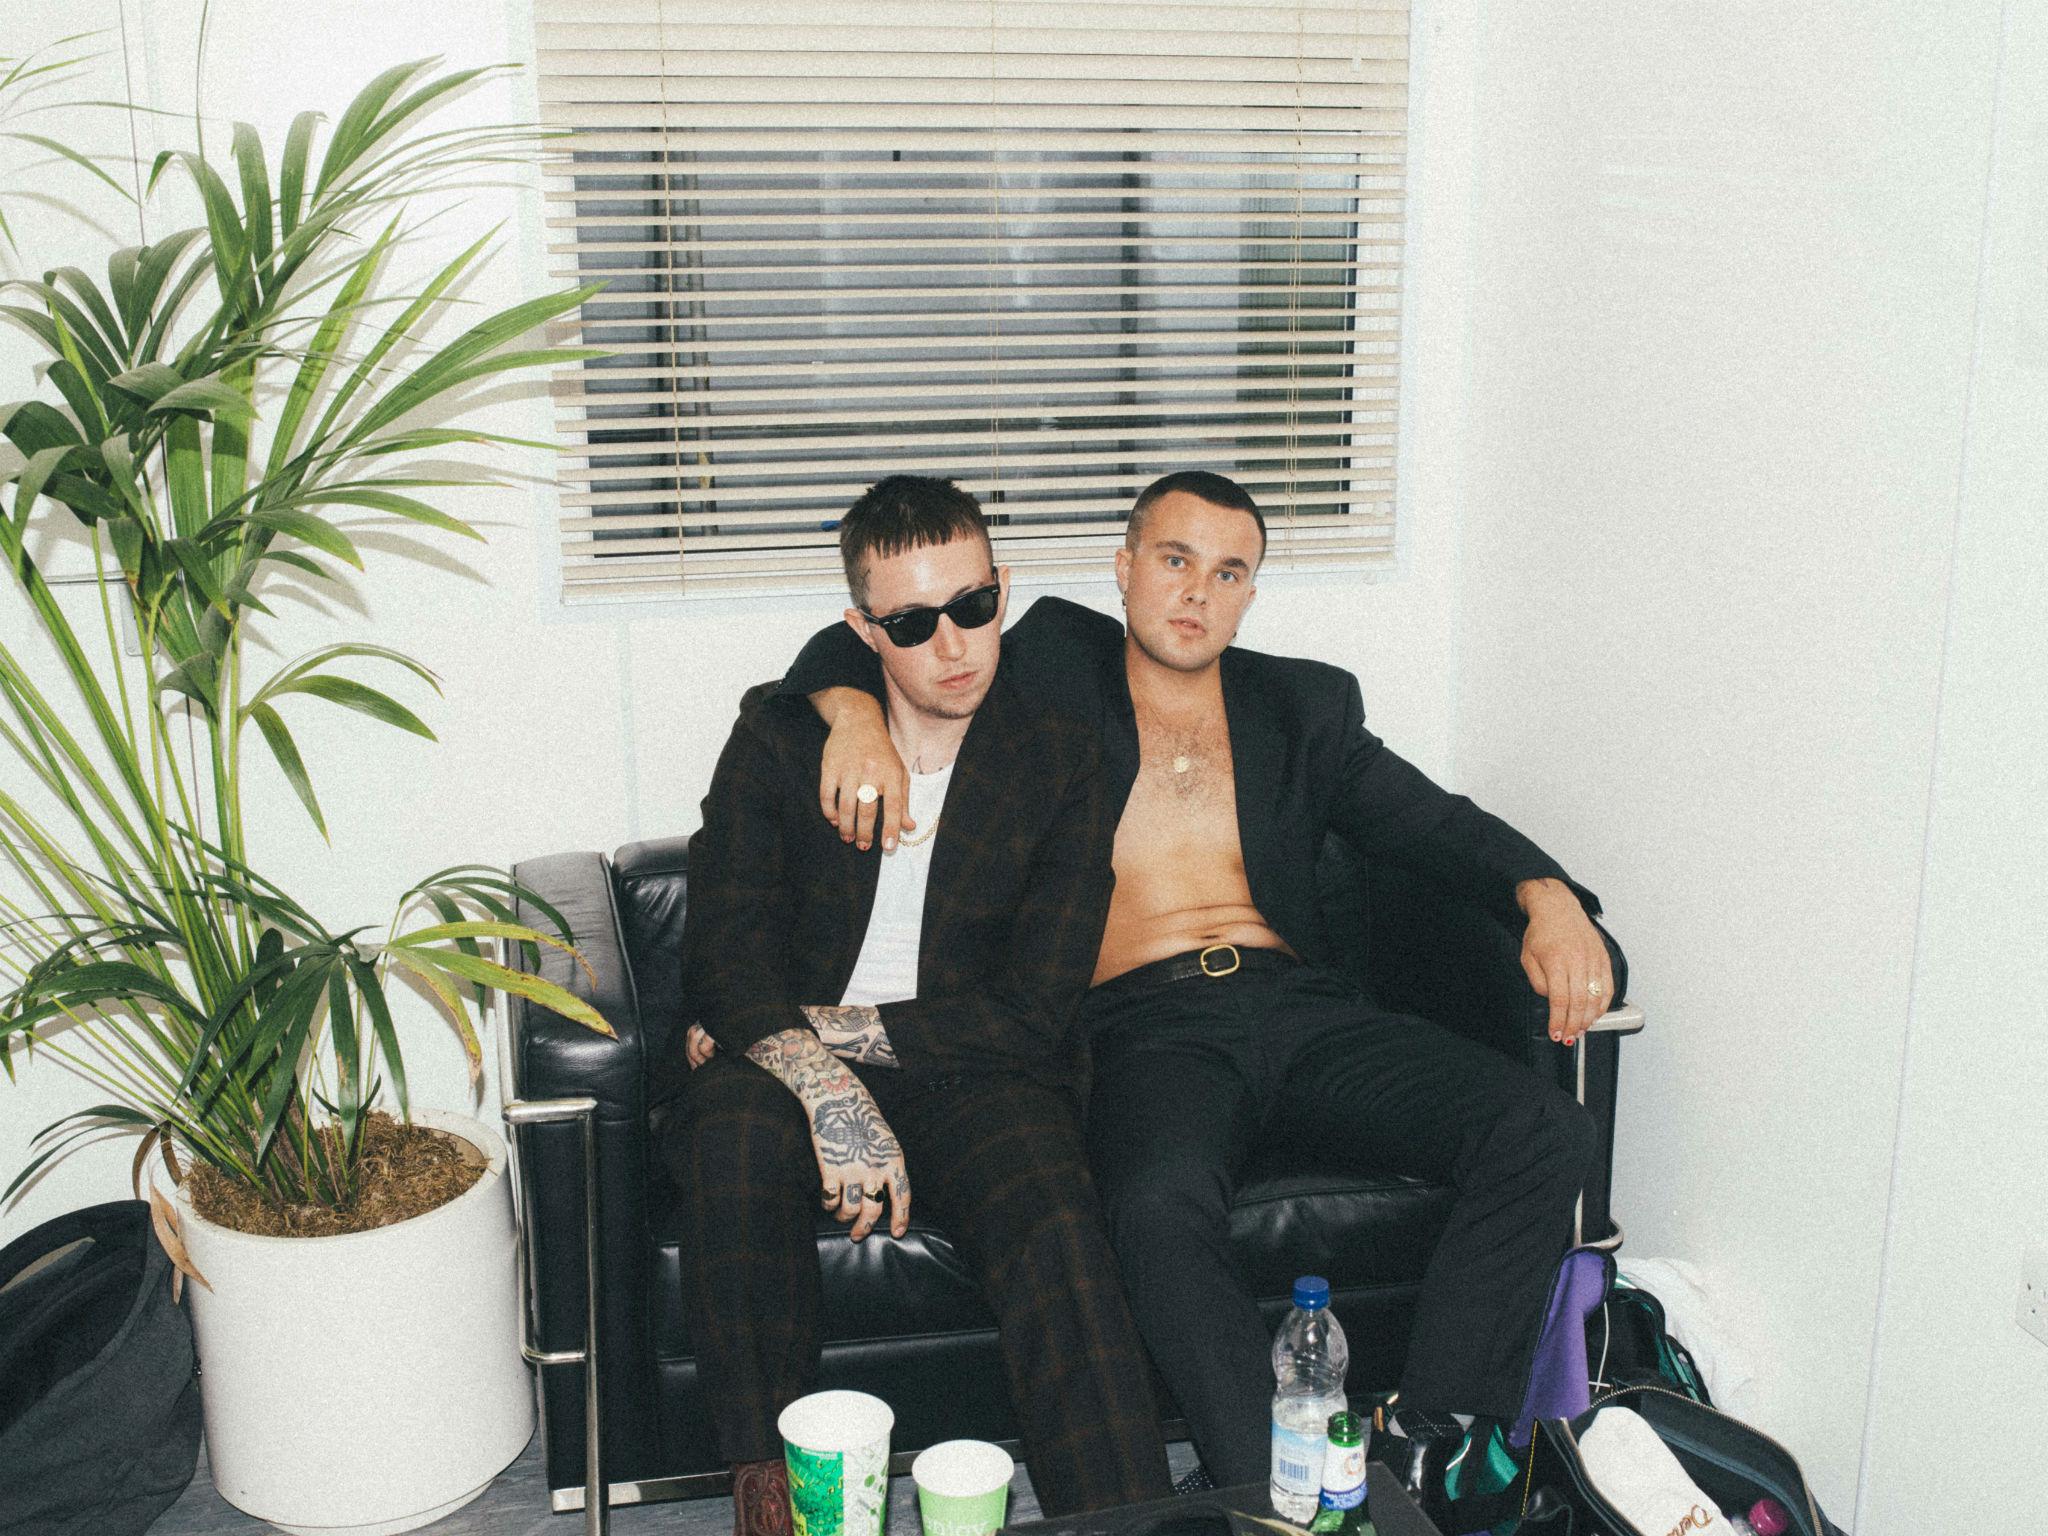 Slaves interview: What makes us angry? ‘School, society, Syria, Brexit ...